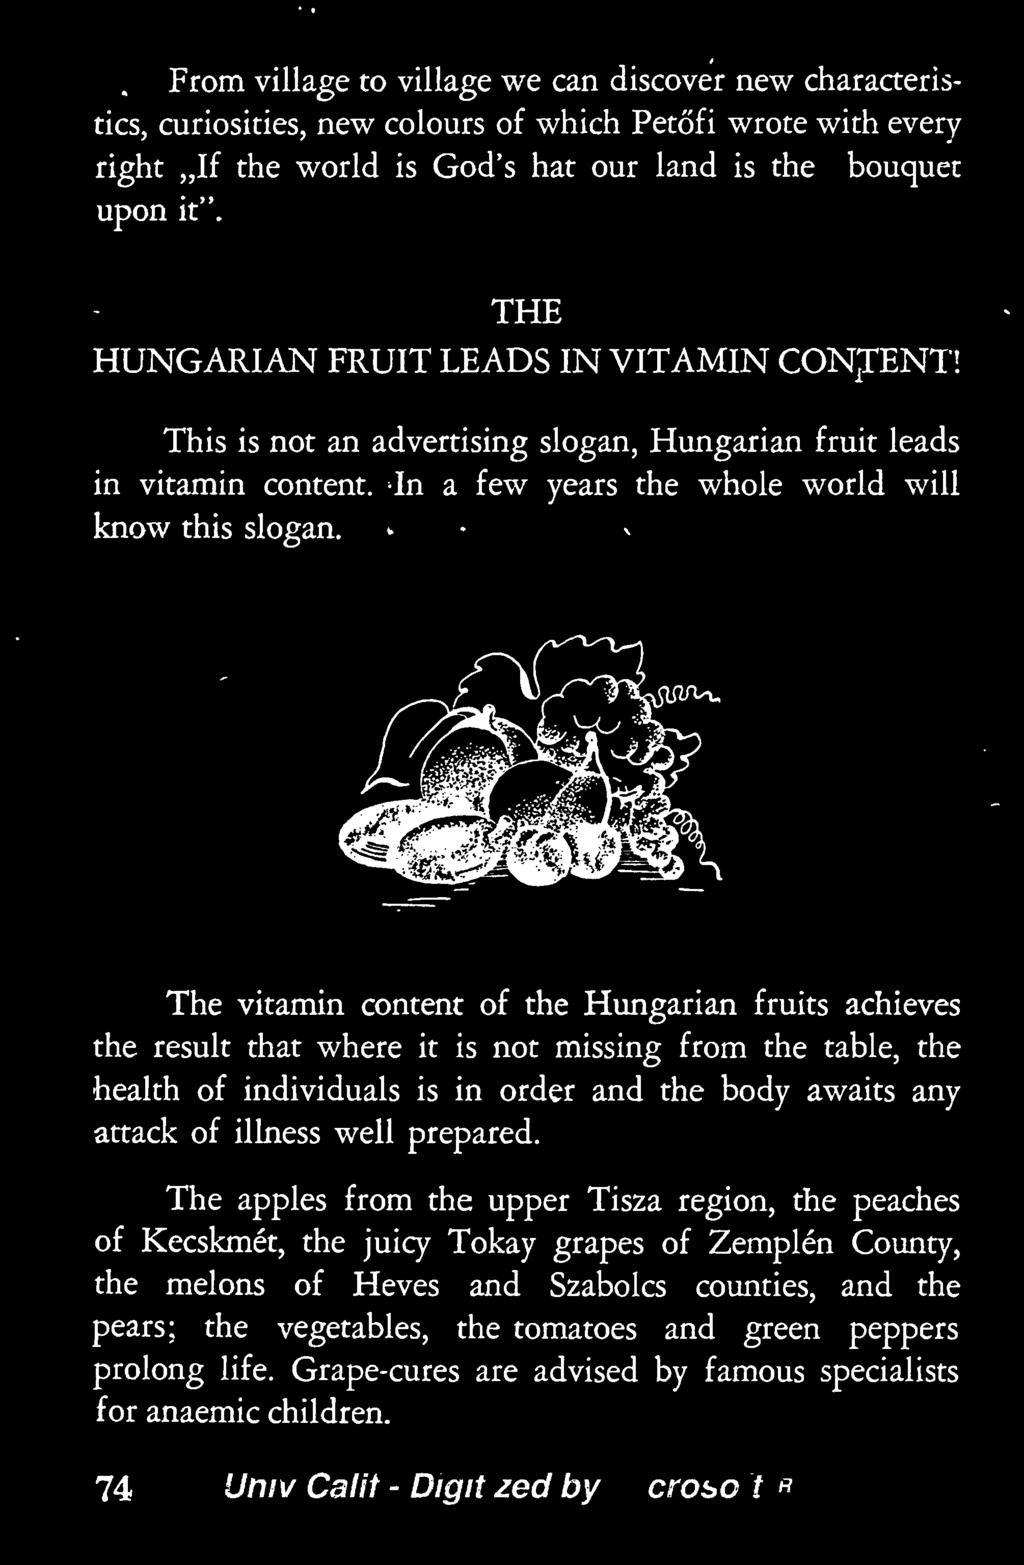 The vitamin content of the Hungarian fruits achieves the result that where it is not missing from the table, the health of individuals is in order and the body awaits any attack of illness well